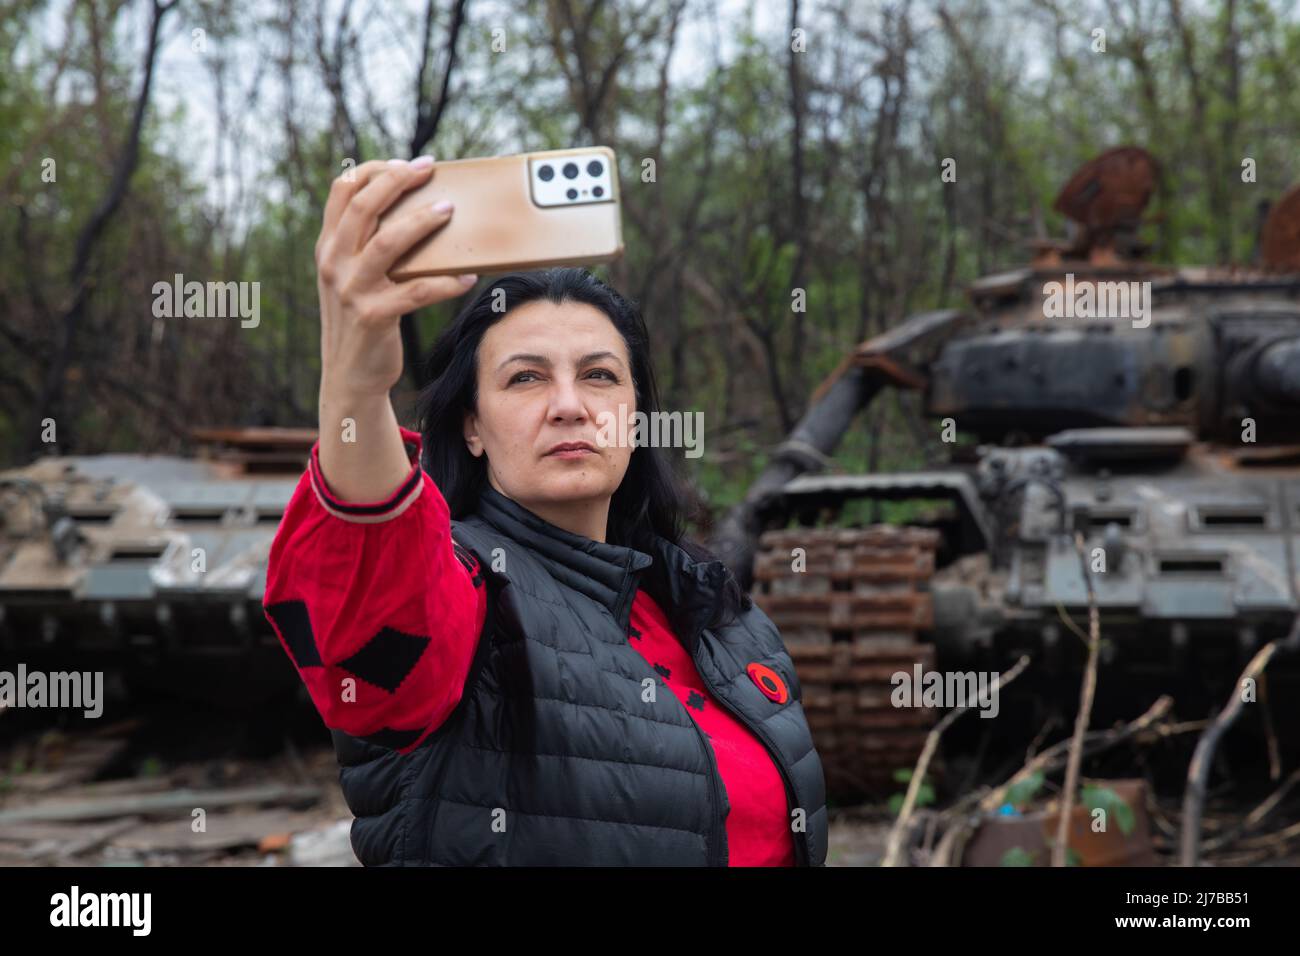 A woman takes a selfie in front of a destroyed Russian tank. Russia invaded Ukraine on 24 February 2022, triggering the largest military attack in Europe since World War II. Stock Photo